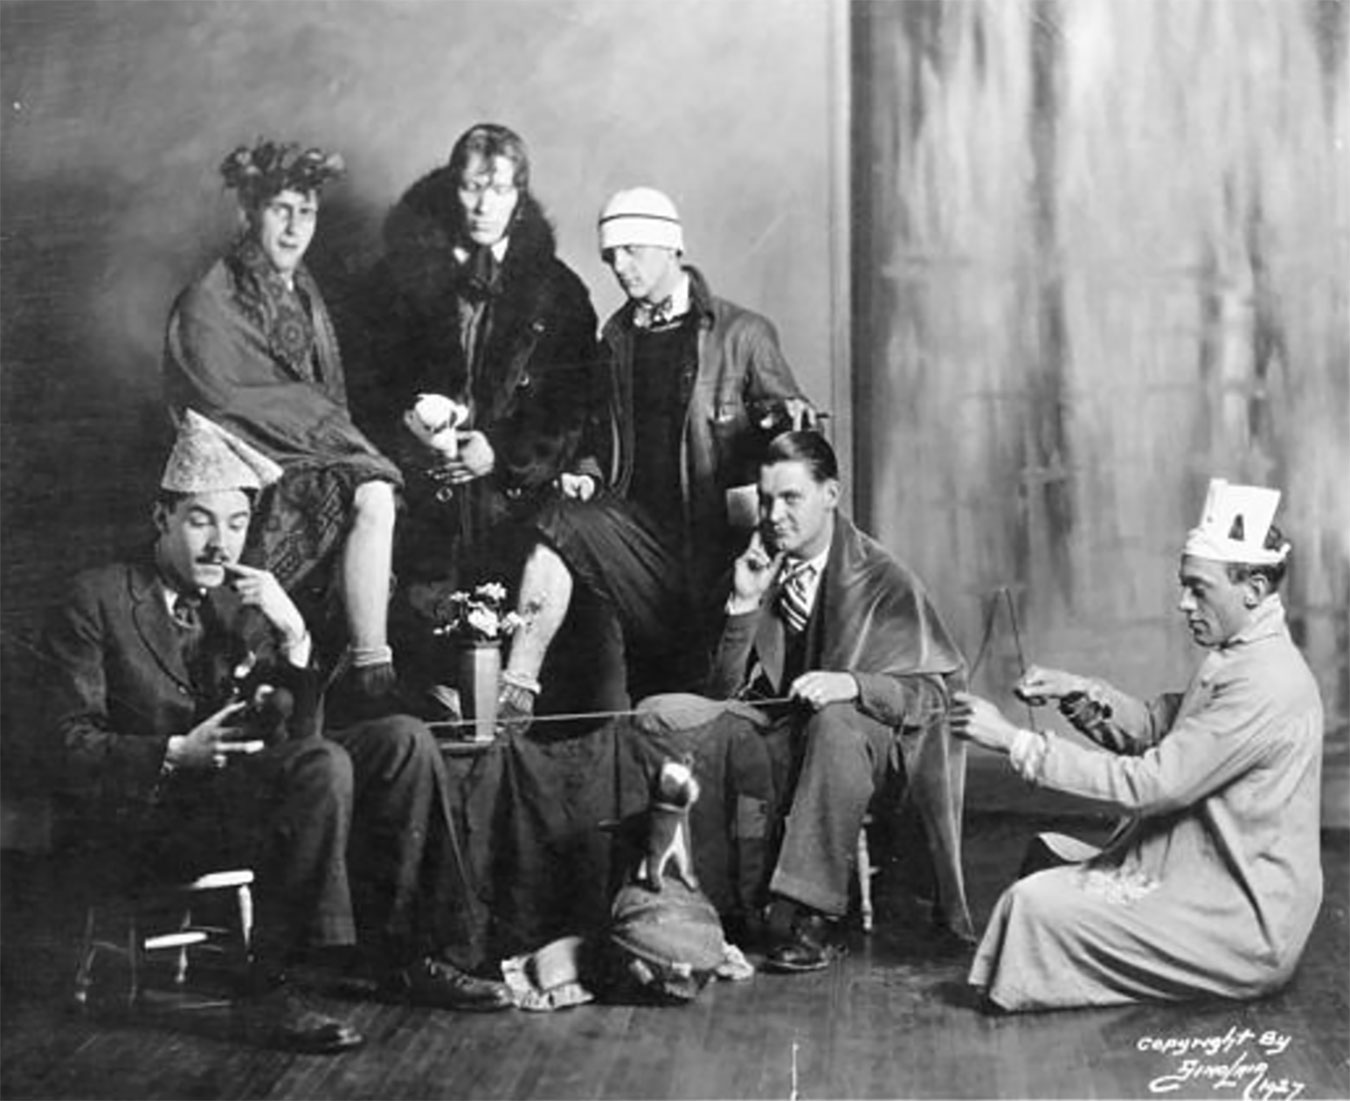 Monk (back row, center) became the chief spokesman of a group of absurdist artists he named the Bent Eagles. Carmichael wrote on the back of this photograph: "Some more crazy musicians from Indiana. Moenkhaus in fur collar, Eddie Wolf with bow and arrow." | Photo courtesy of Indiana University Archives of Traditional Music